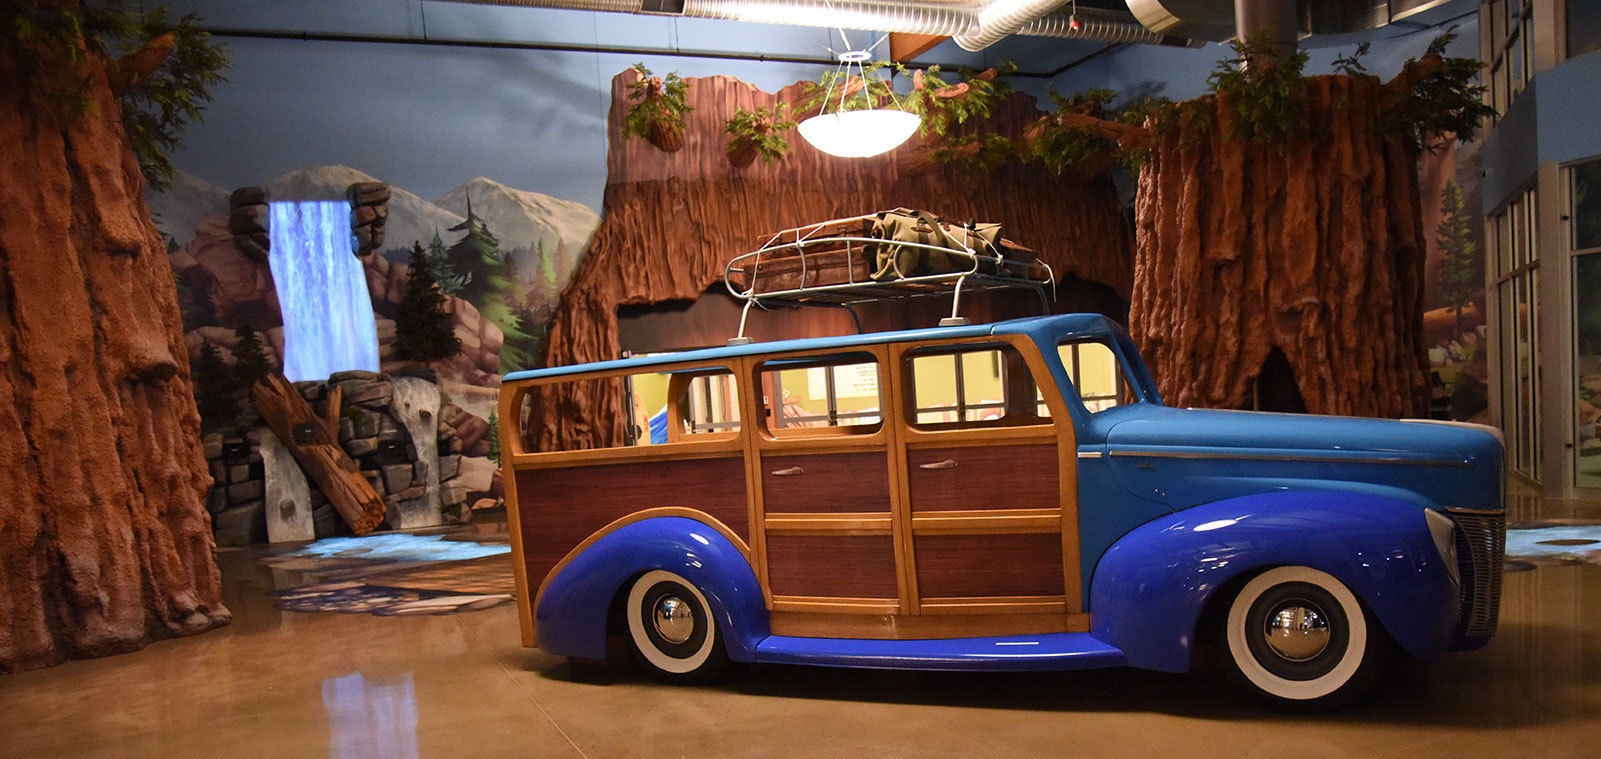 Giant sculpted 3D trees, animated waterfall plus a life-size blue Woody Wagon in a Camping Themed Space at Abundant Life Church